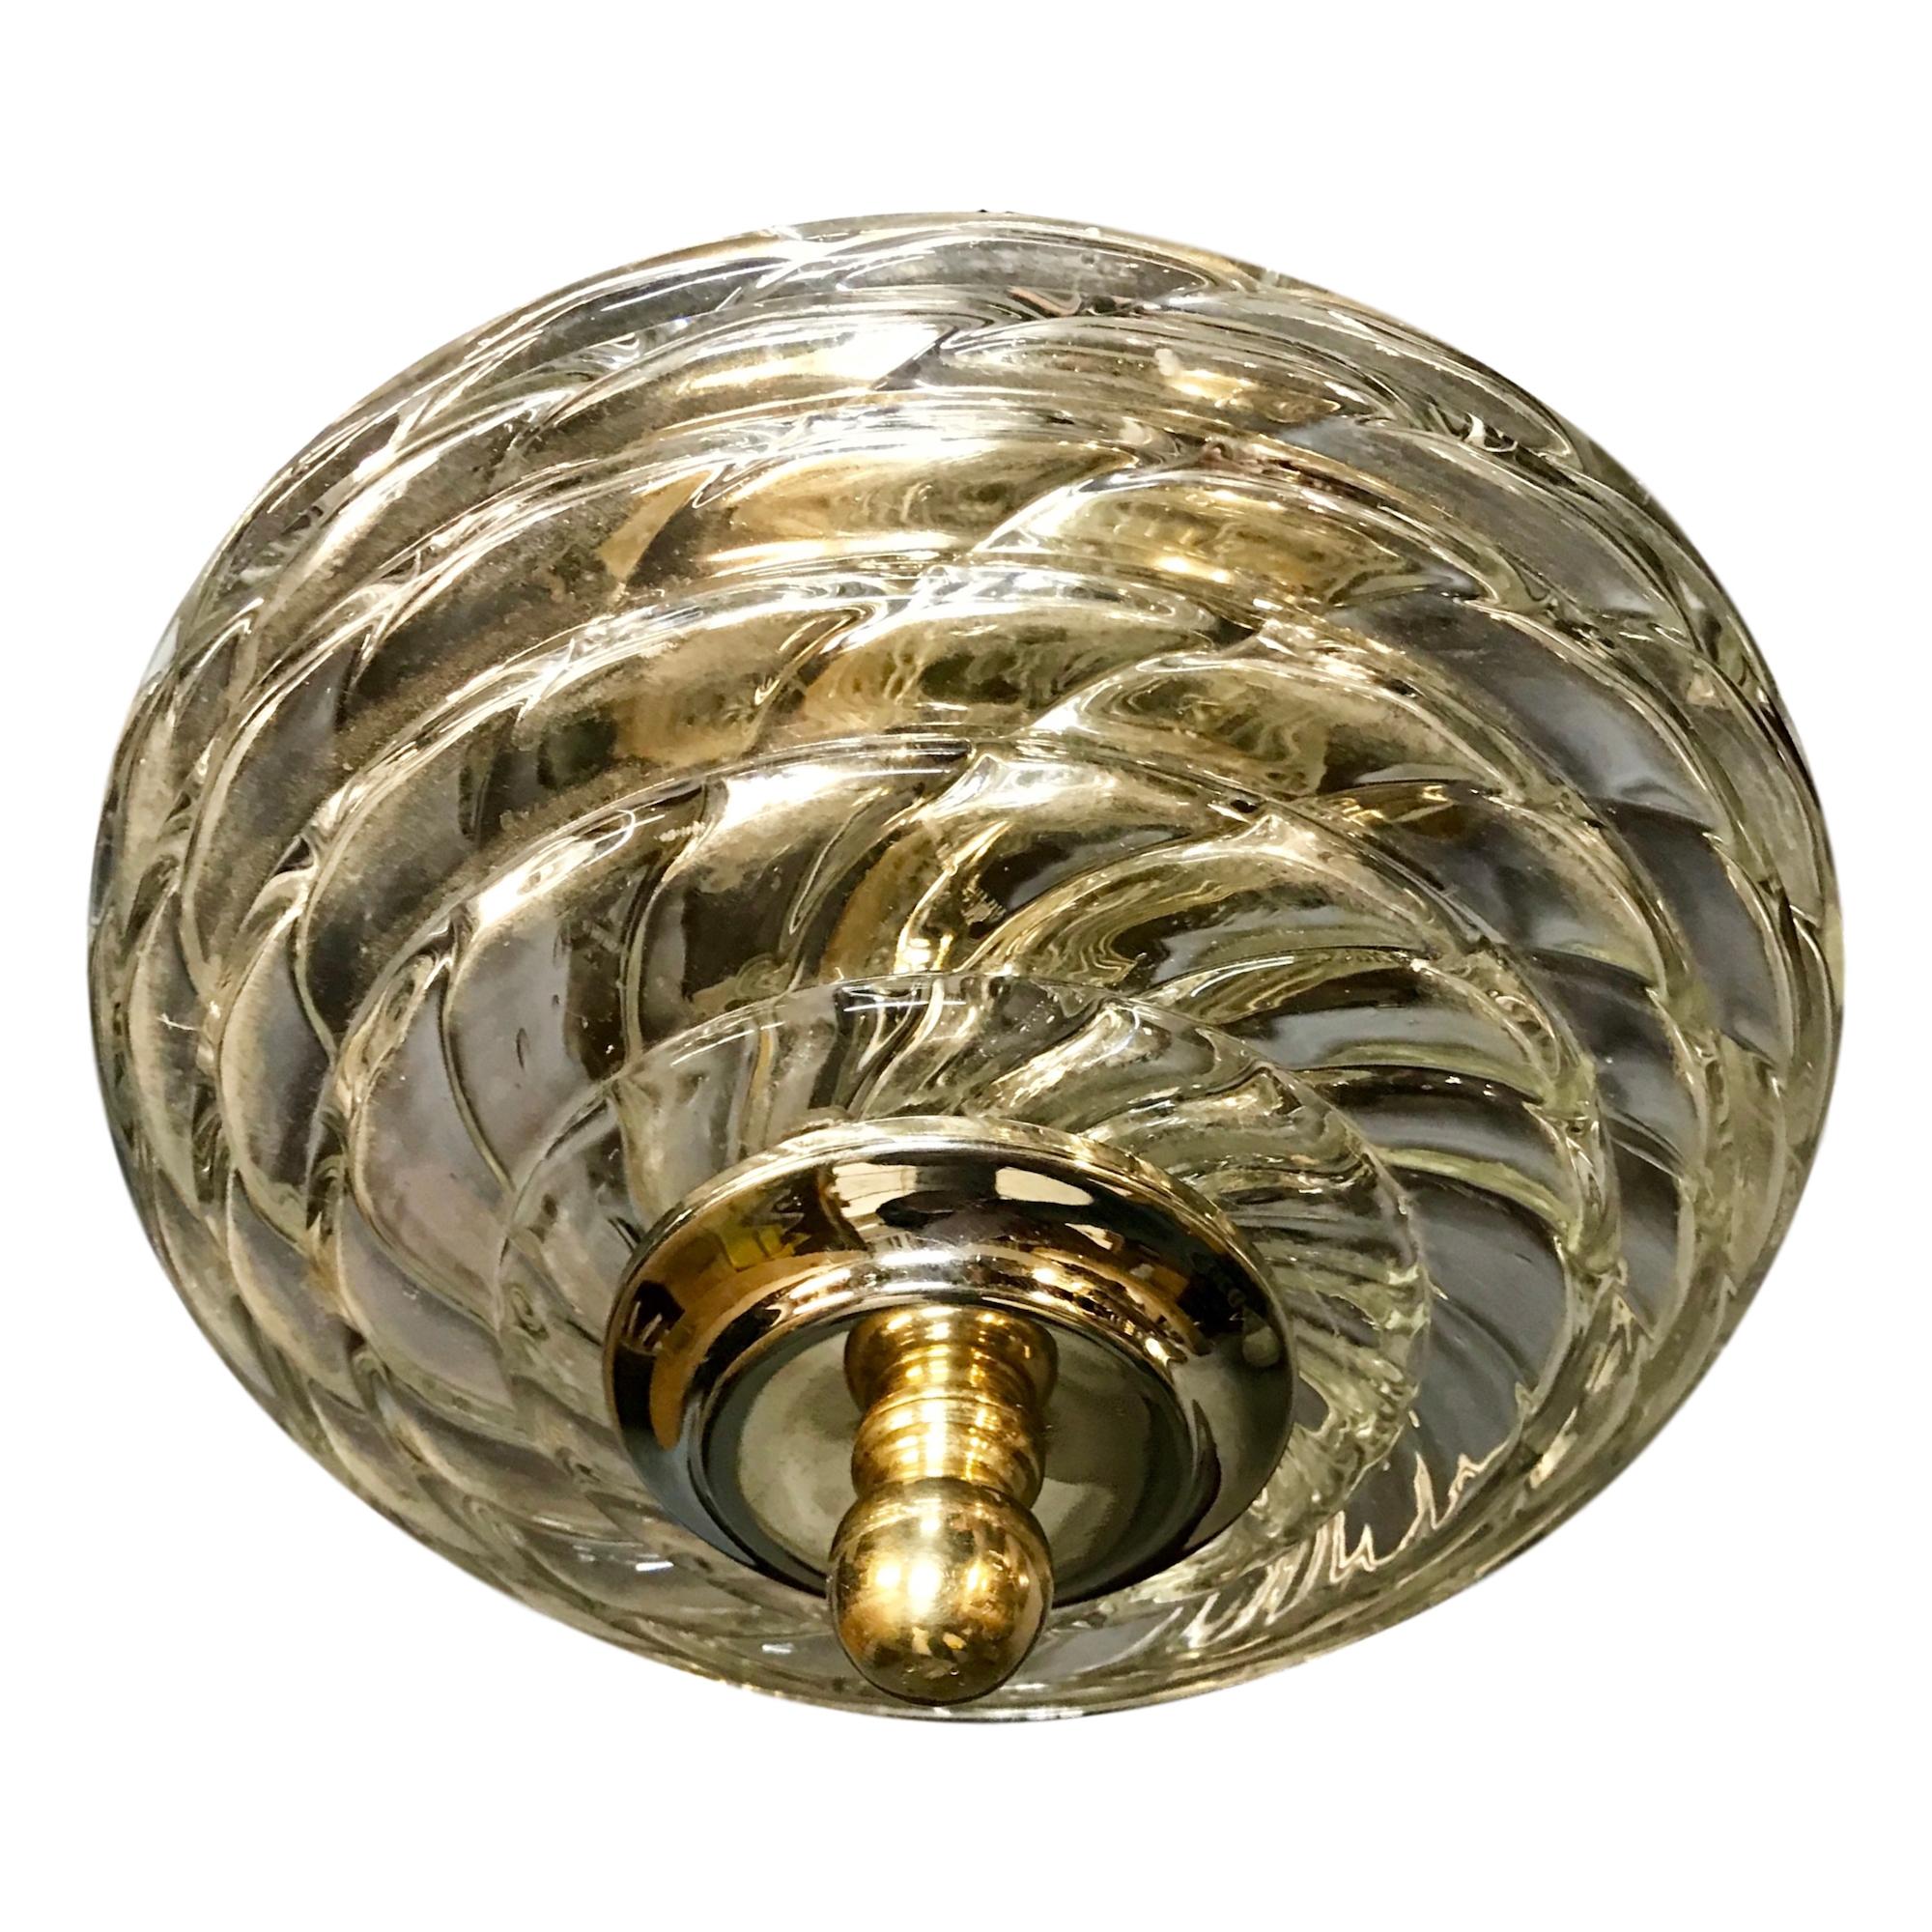 A circa 1950's Murano glass flushmount ceiling fixtures with interior light.

Measurements:
Drop: 6